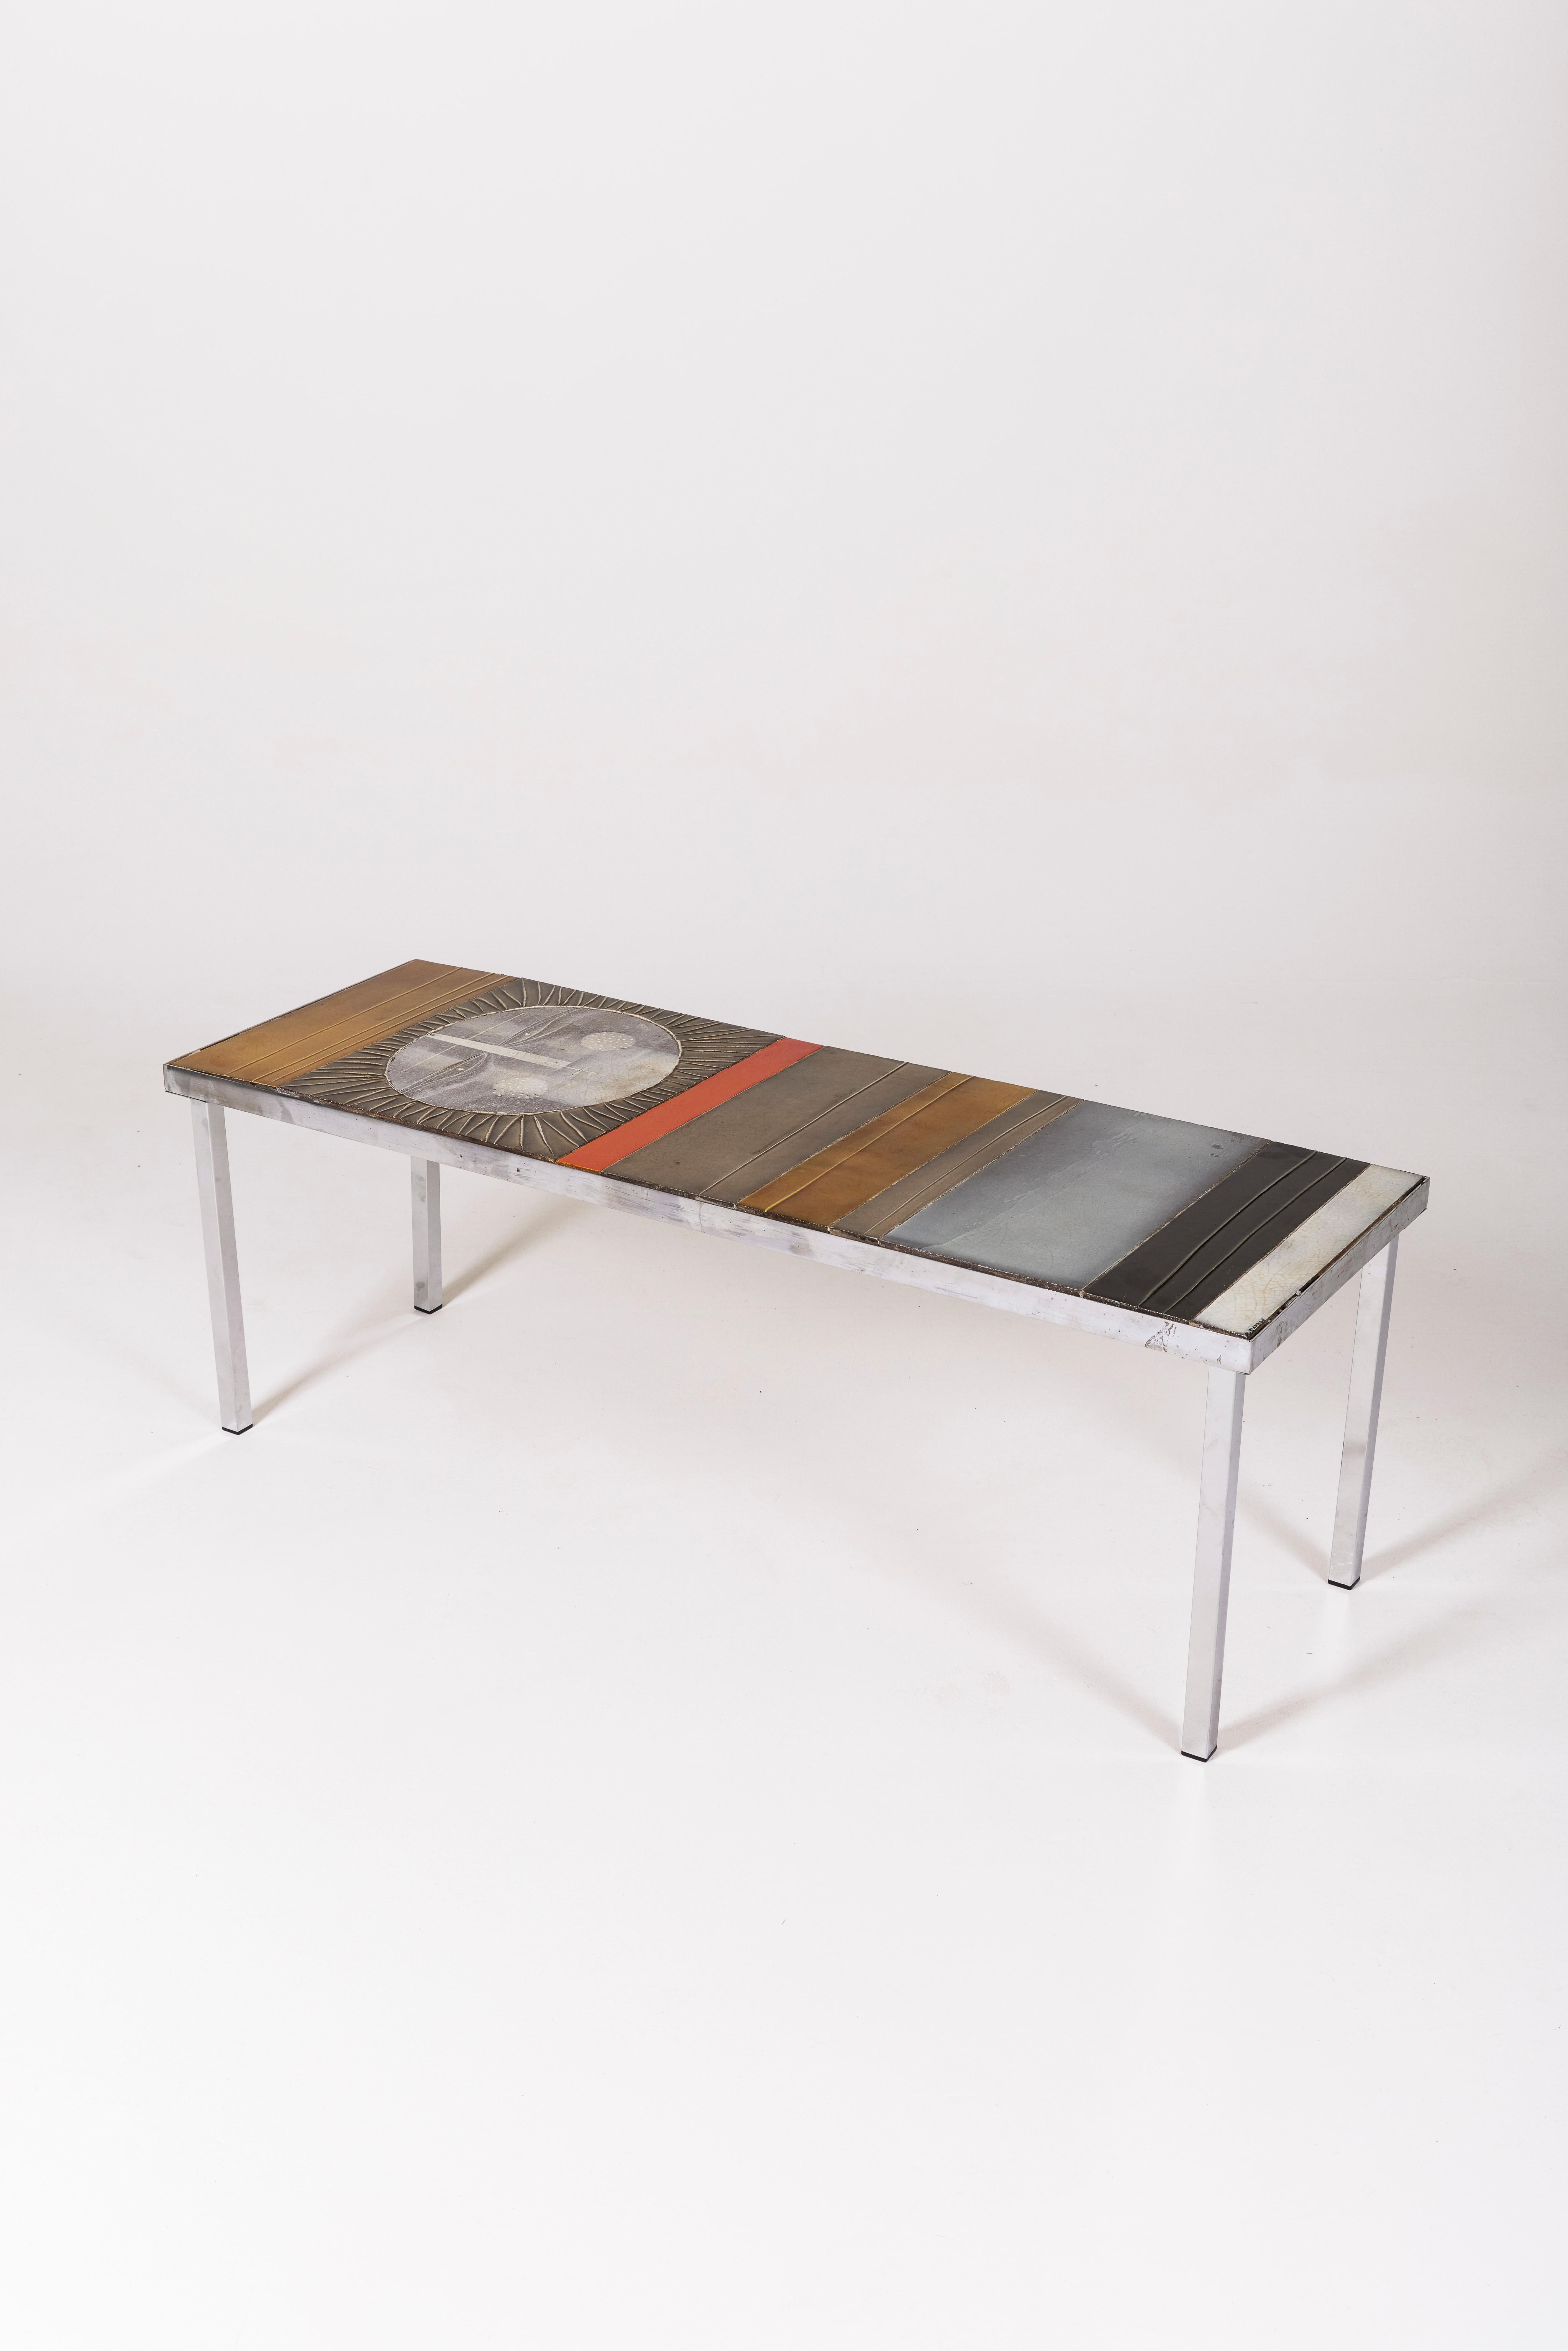 Soleil model coffee table by Roger Capron, from the 1960s. Ceramic tabletop with a sun motif. The base is made of chrome metal. Excellent condition.
Lp1254.